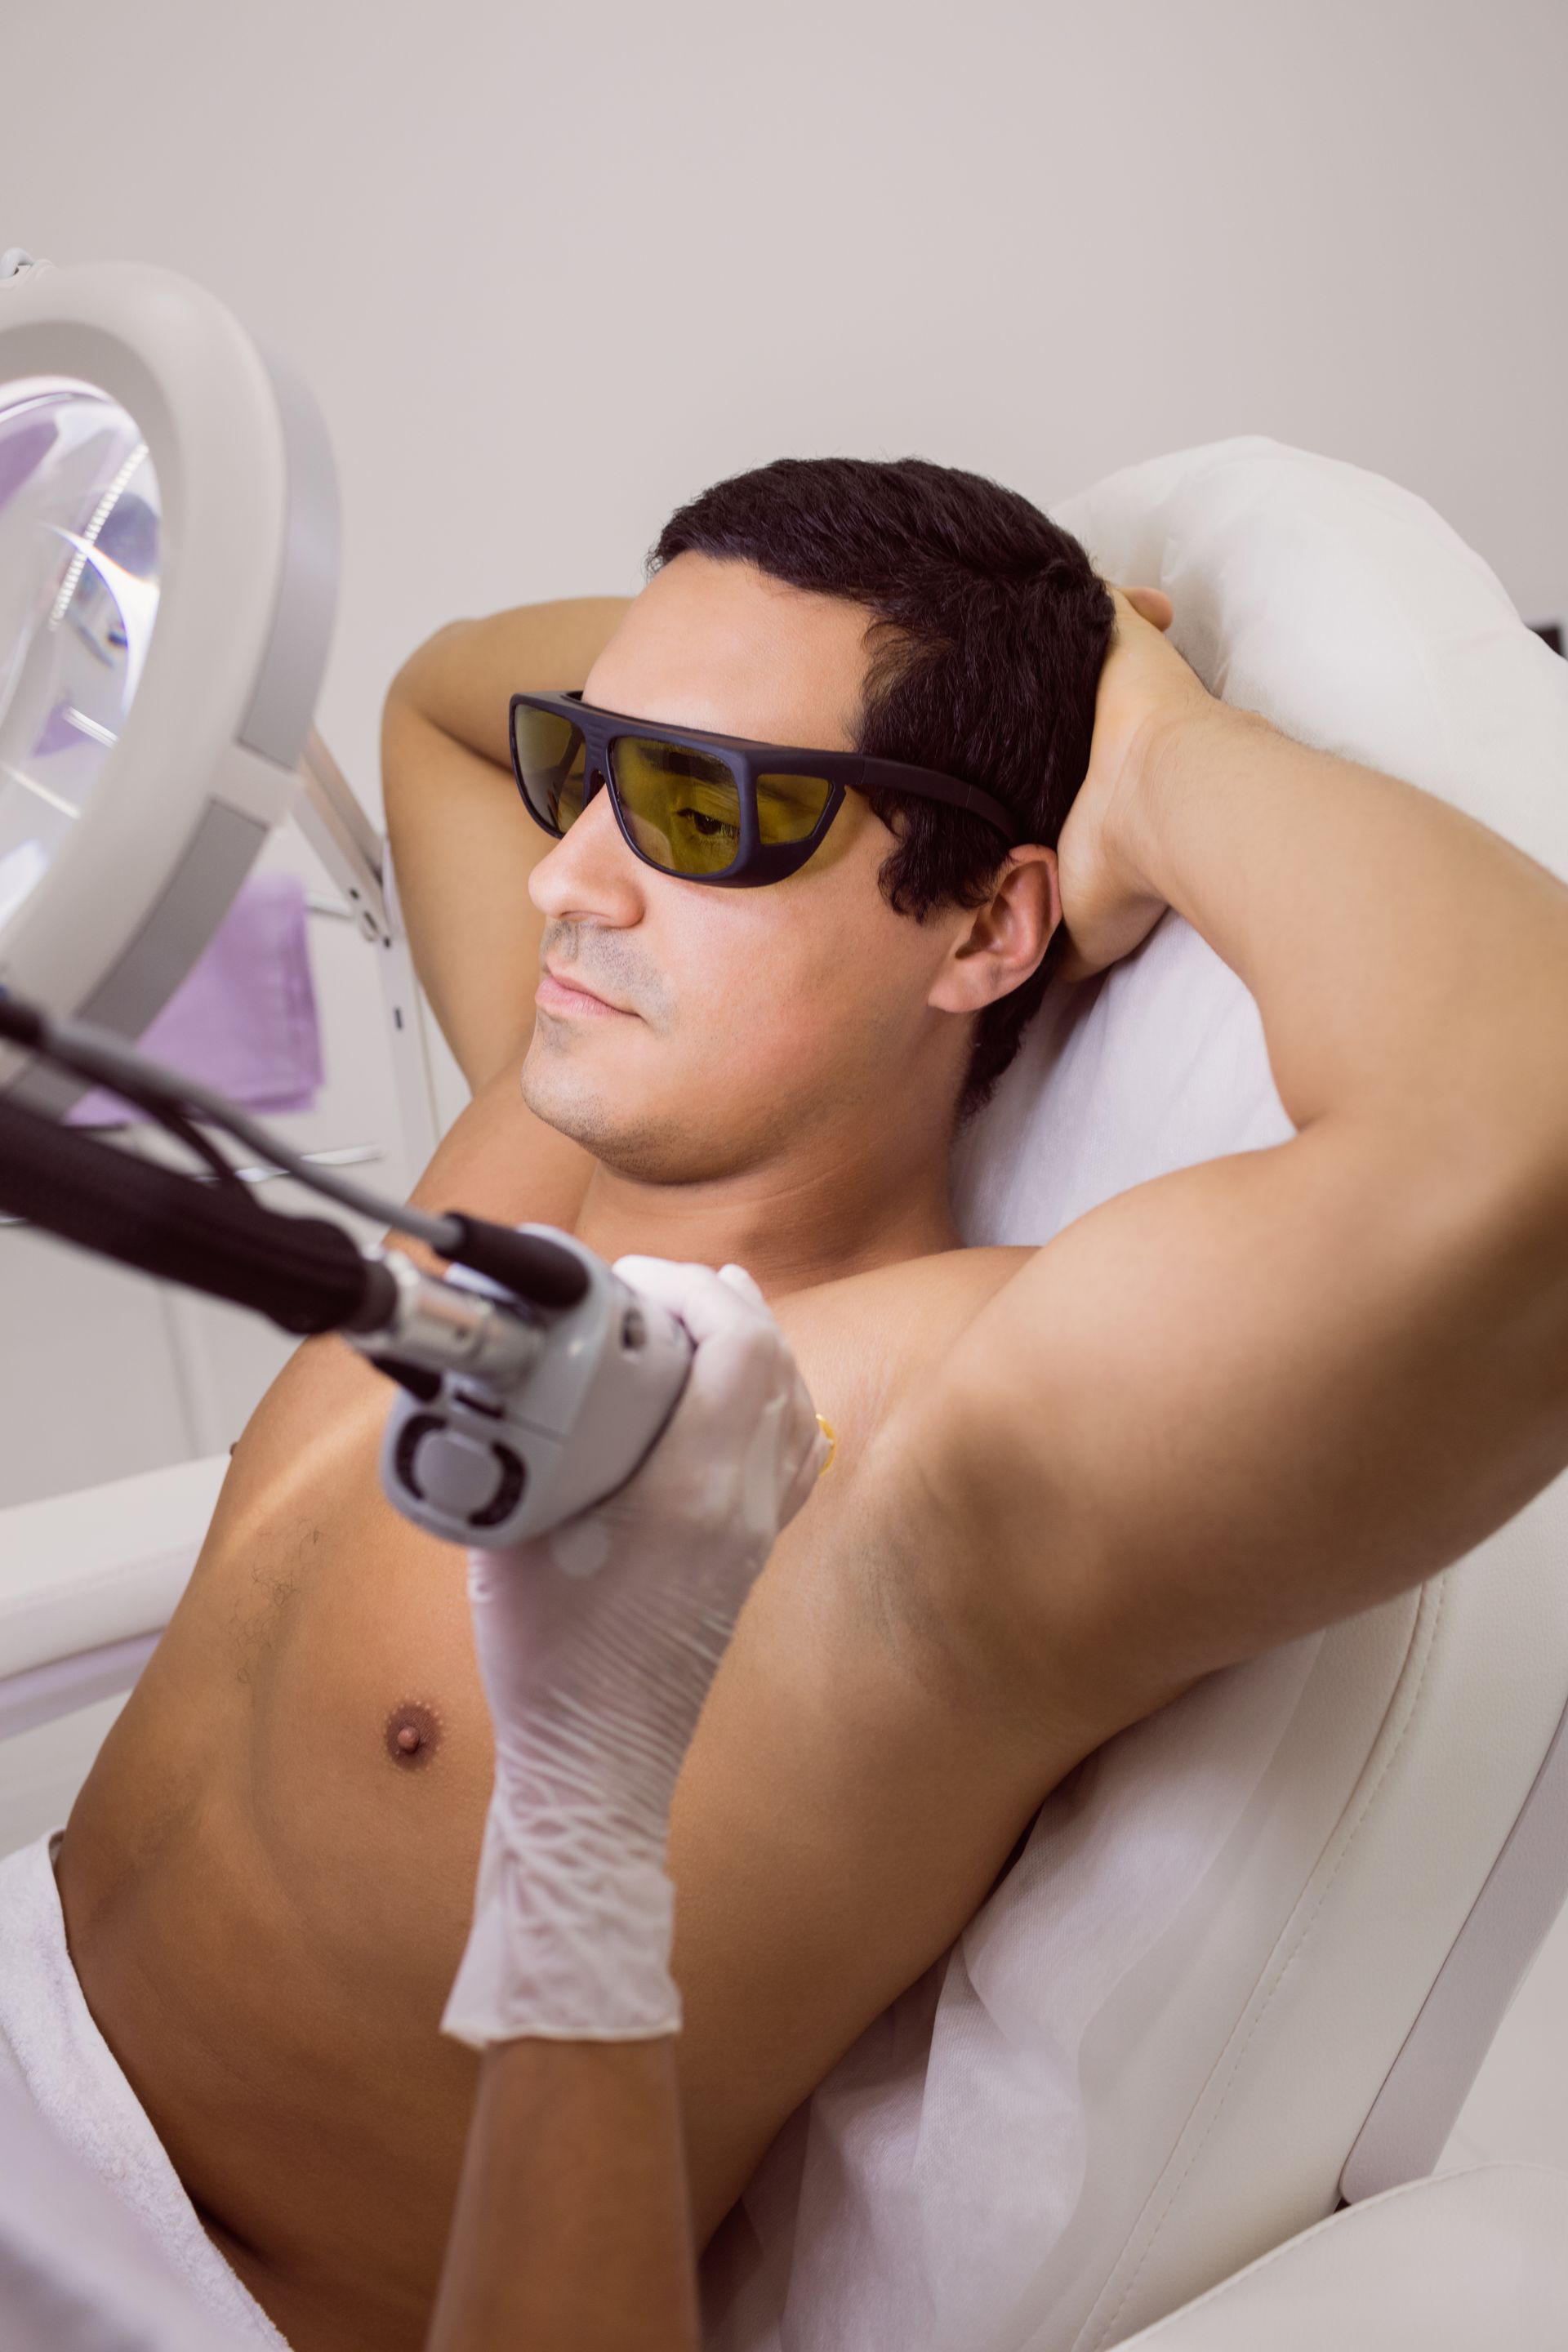 a shirtless man is getting a laser hair removal treatment on his armpits